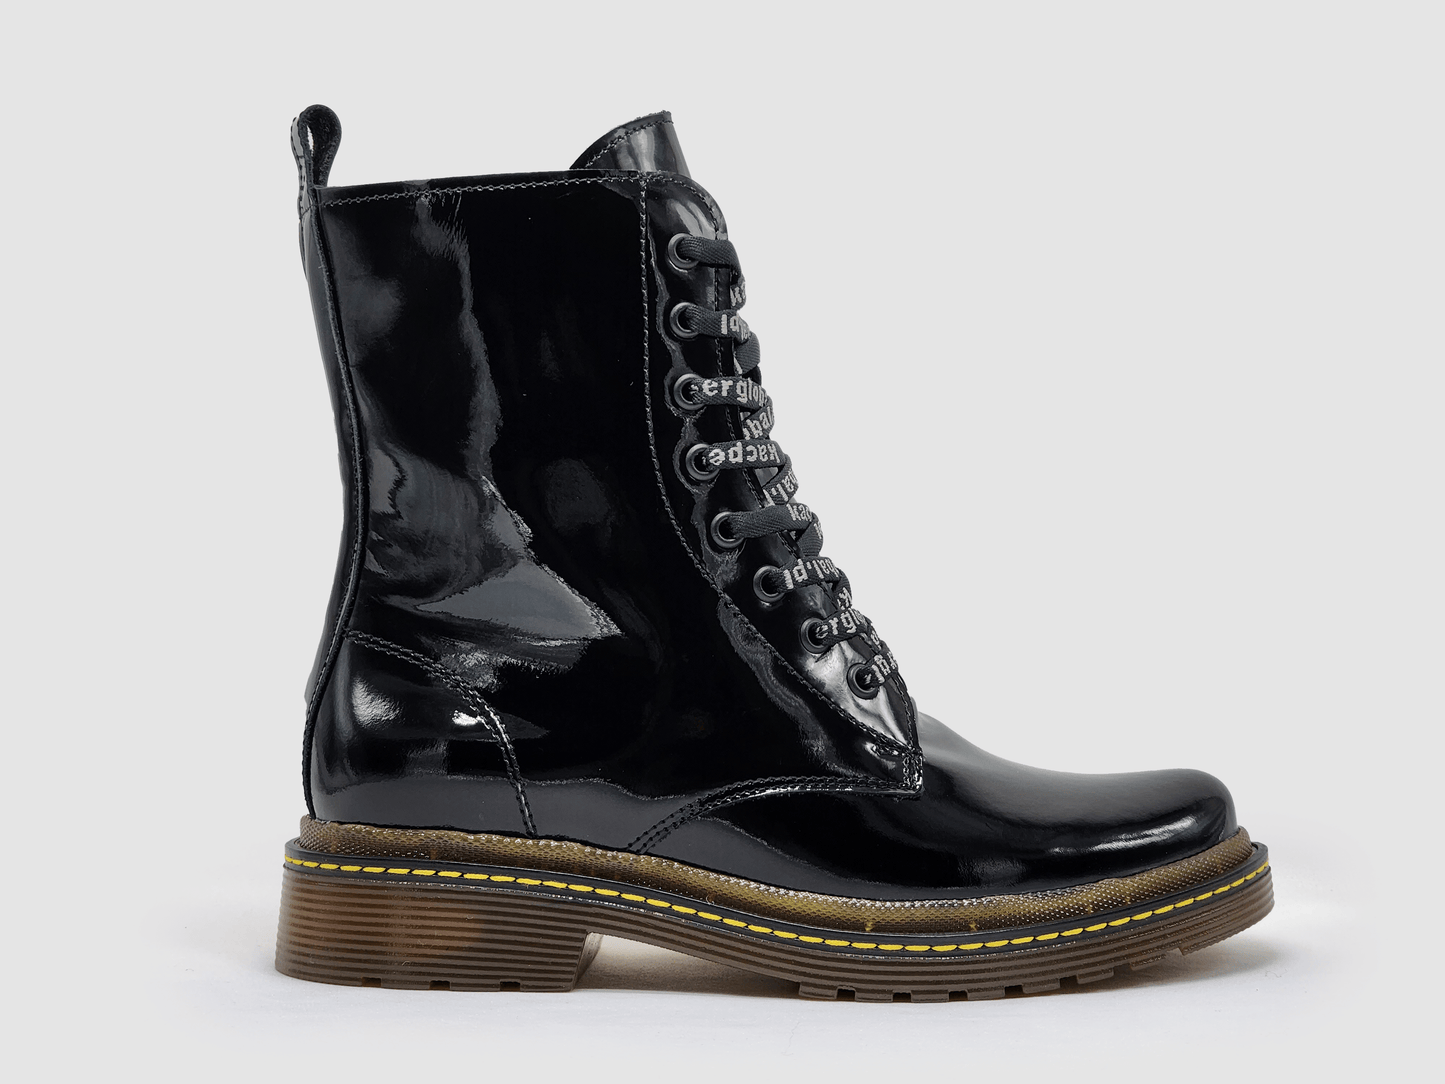 Women's Premium Mid Patent Leather Boots - Kacper Global Shoes 